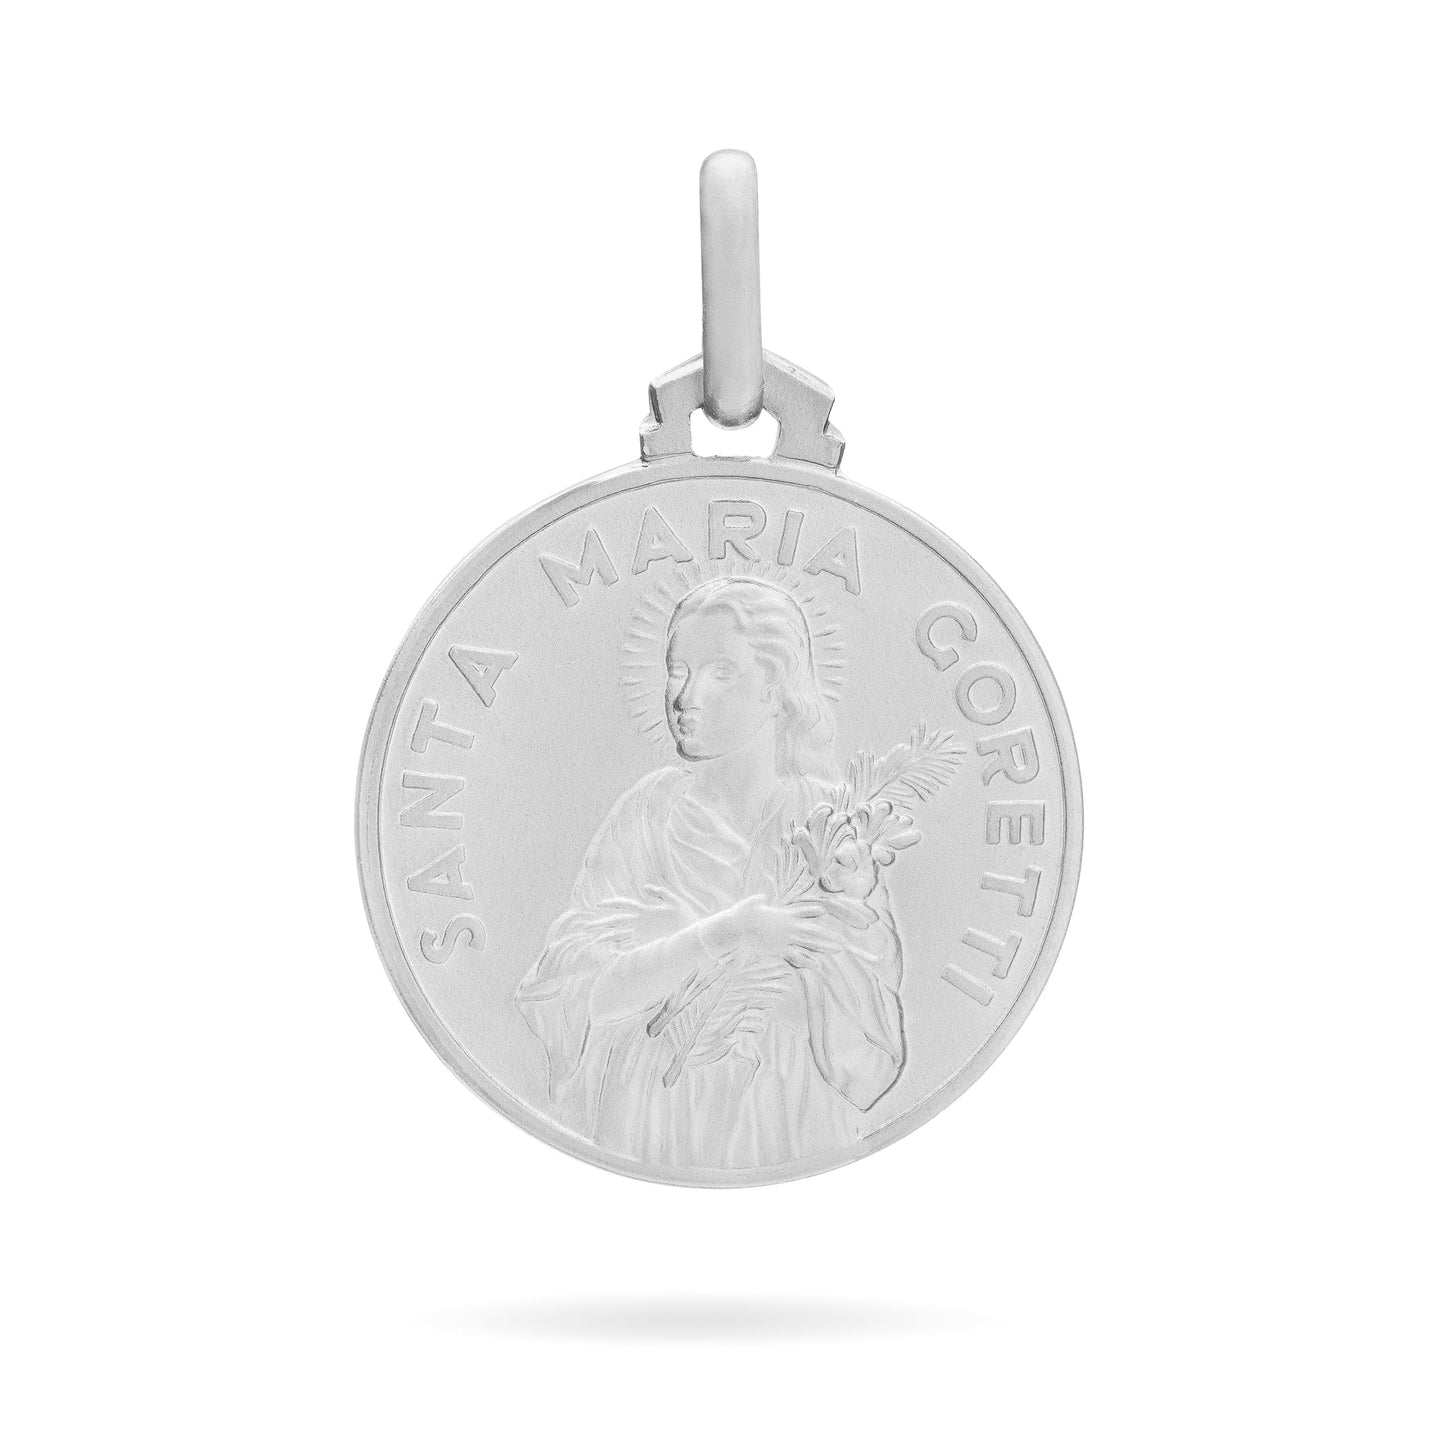 MONDO CATTOLICO Medal 18 mm (0.70 in) St. Mary Goretti Sterling Silver Medal